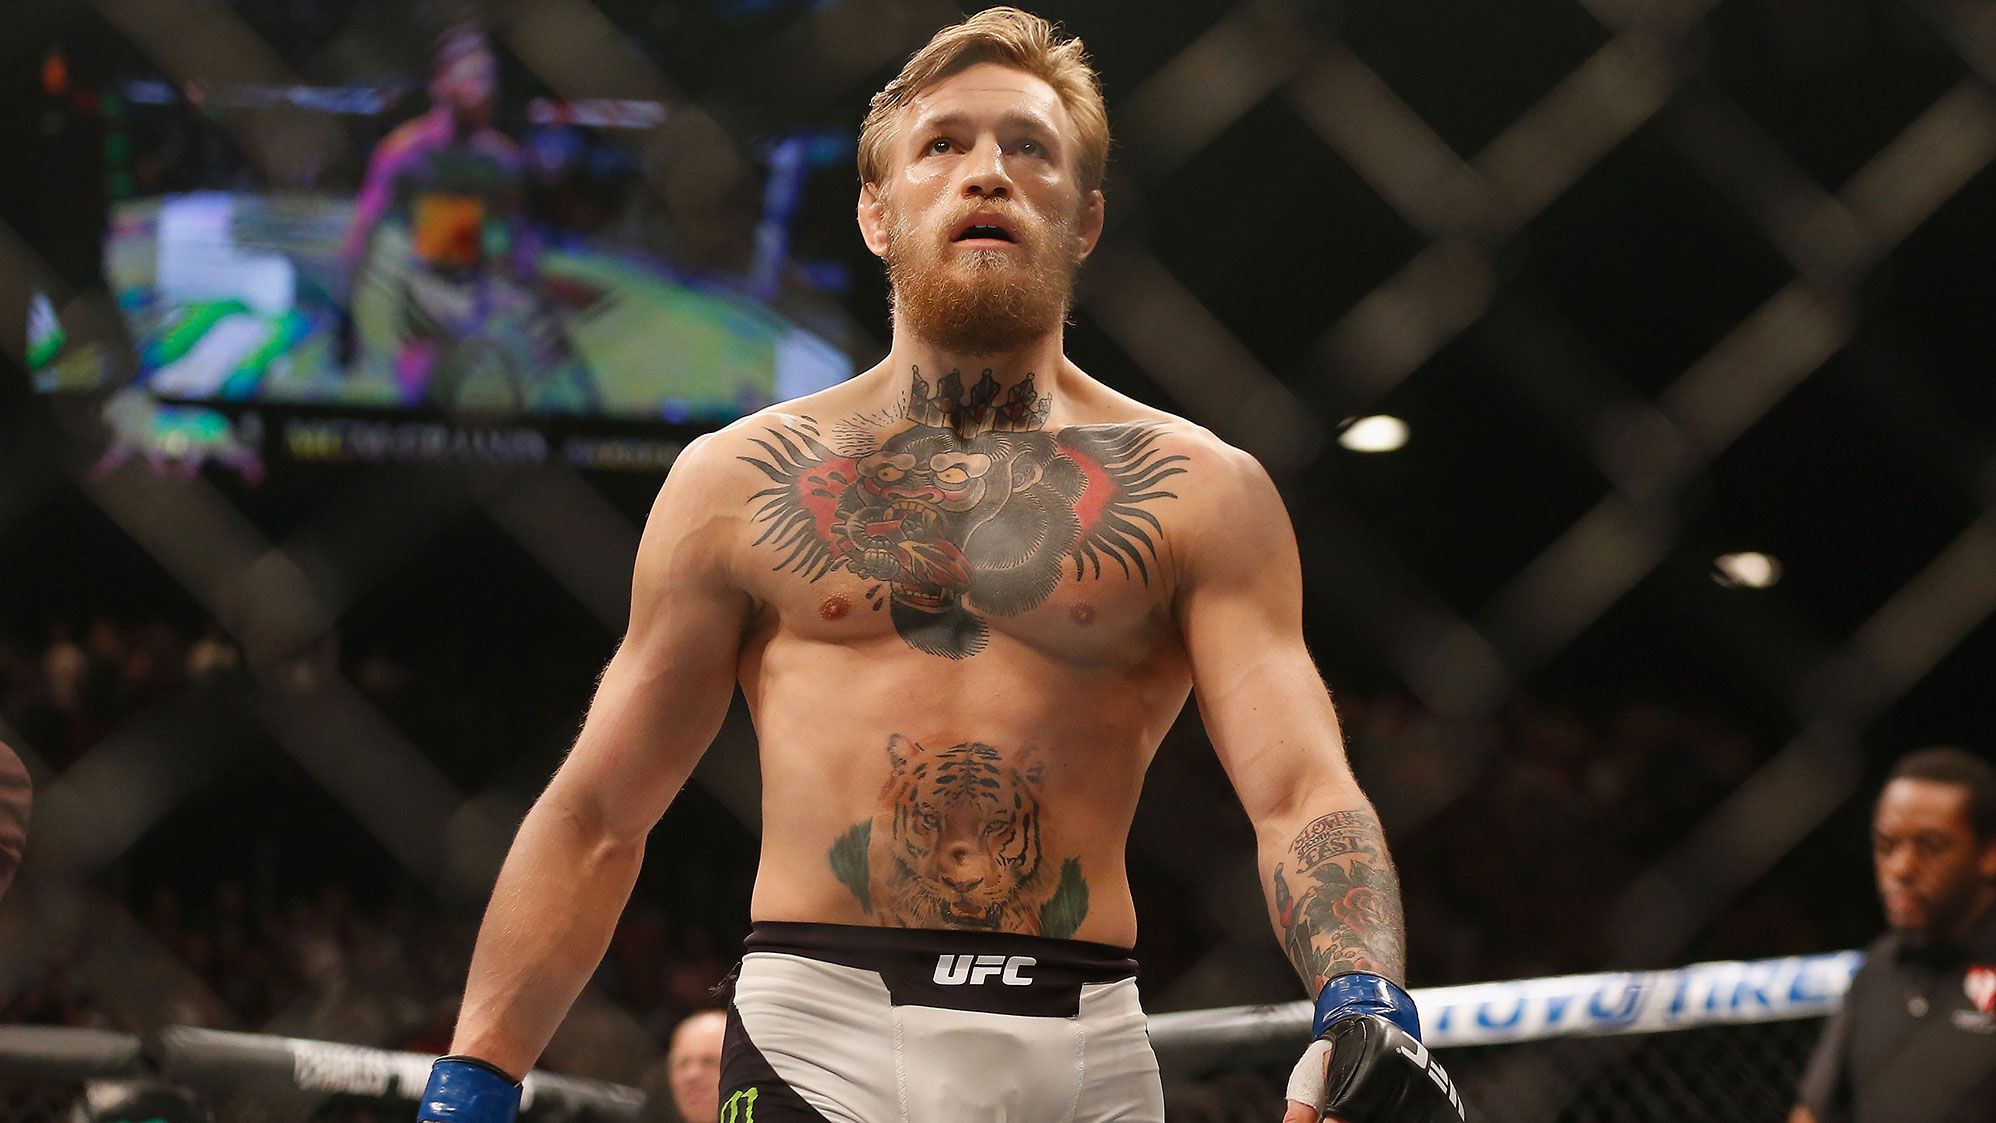 Forbes Highest Paid Athlete: UFC Conor McGregor was the world's highest-paid athlete ahead of soccer players Lionel Messi and Cristiano Ronaldo Michael Bisping